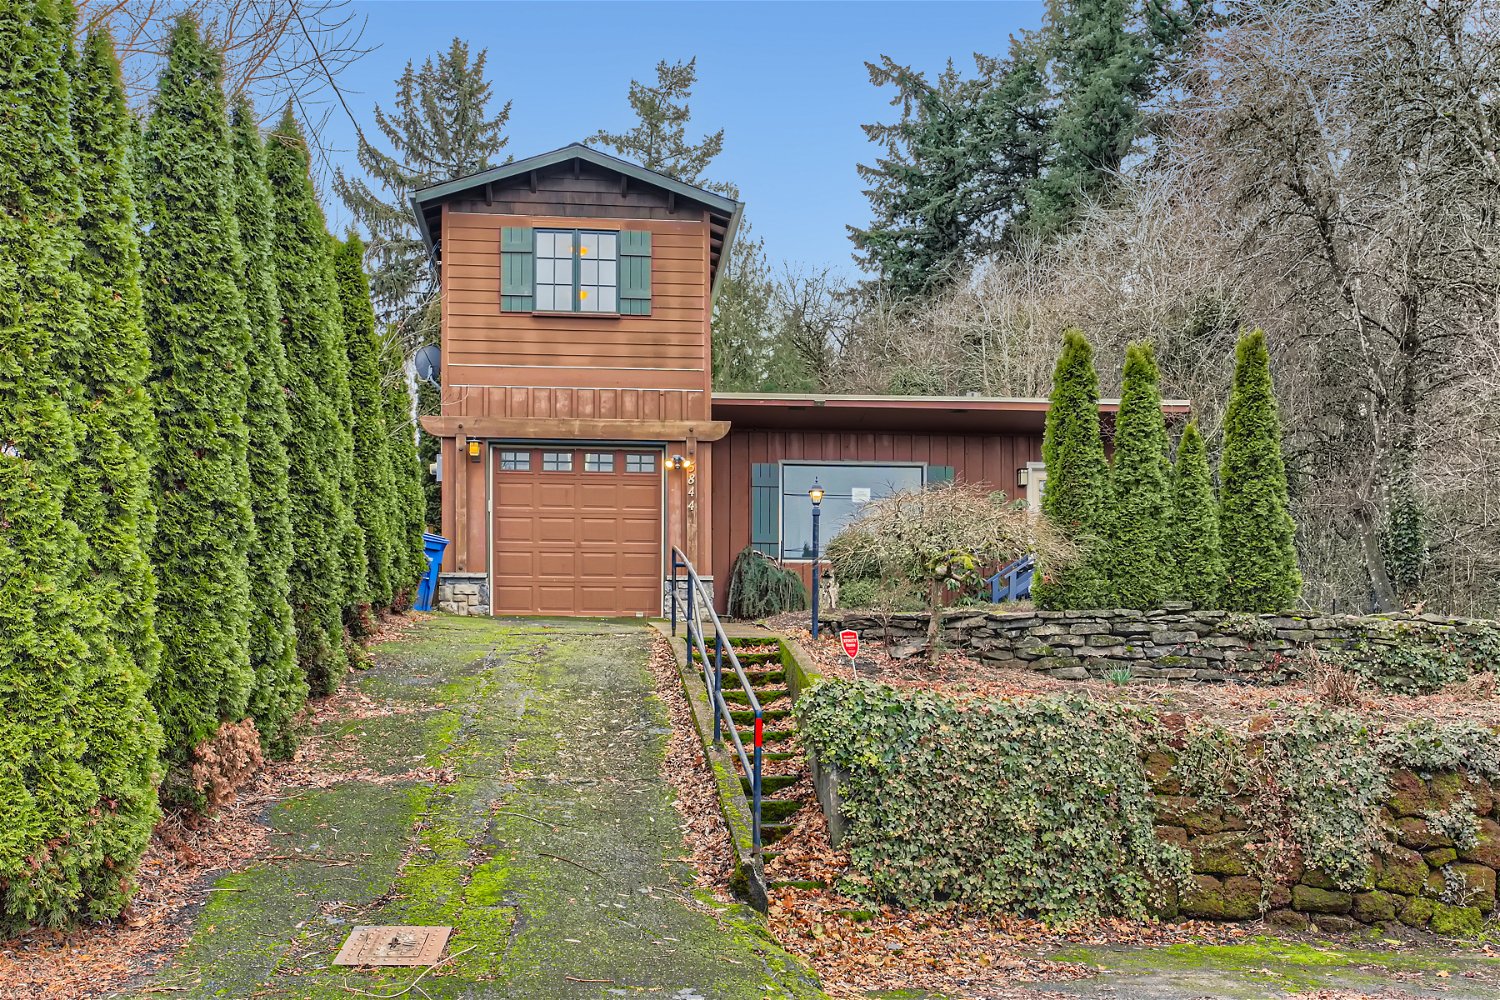 Sold! Cozy two bedroom home located in Multnomah Village!